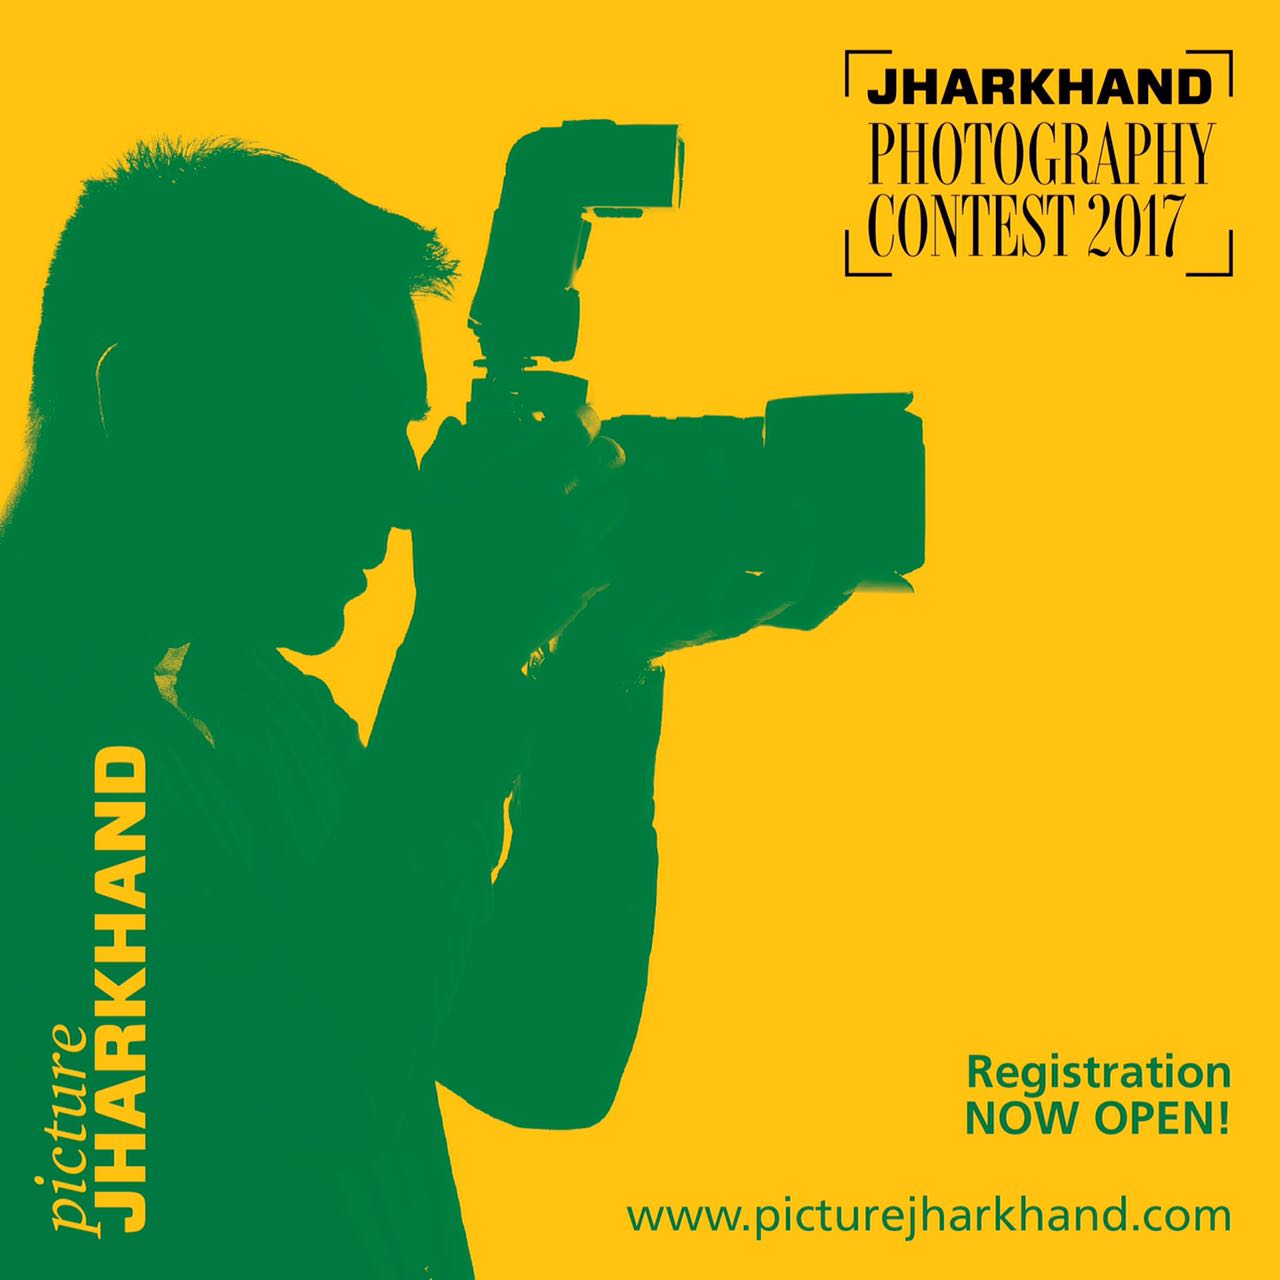 Picture Jharkhand contest